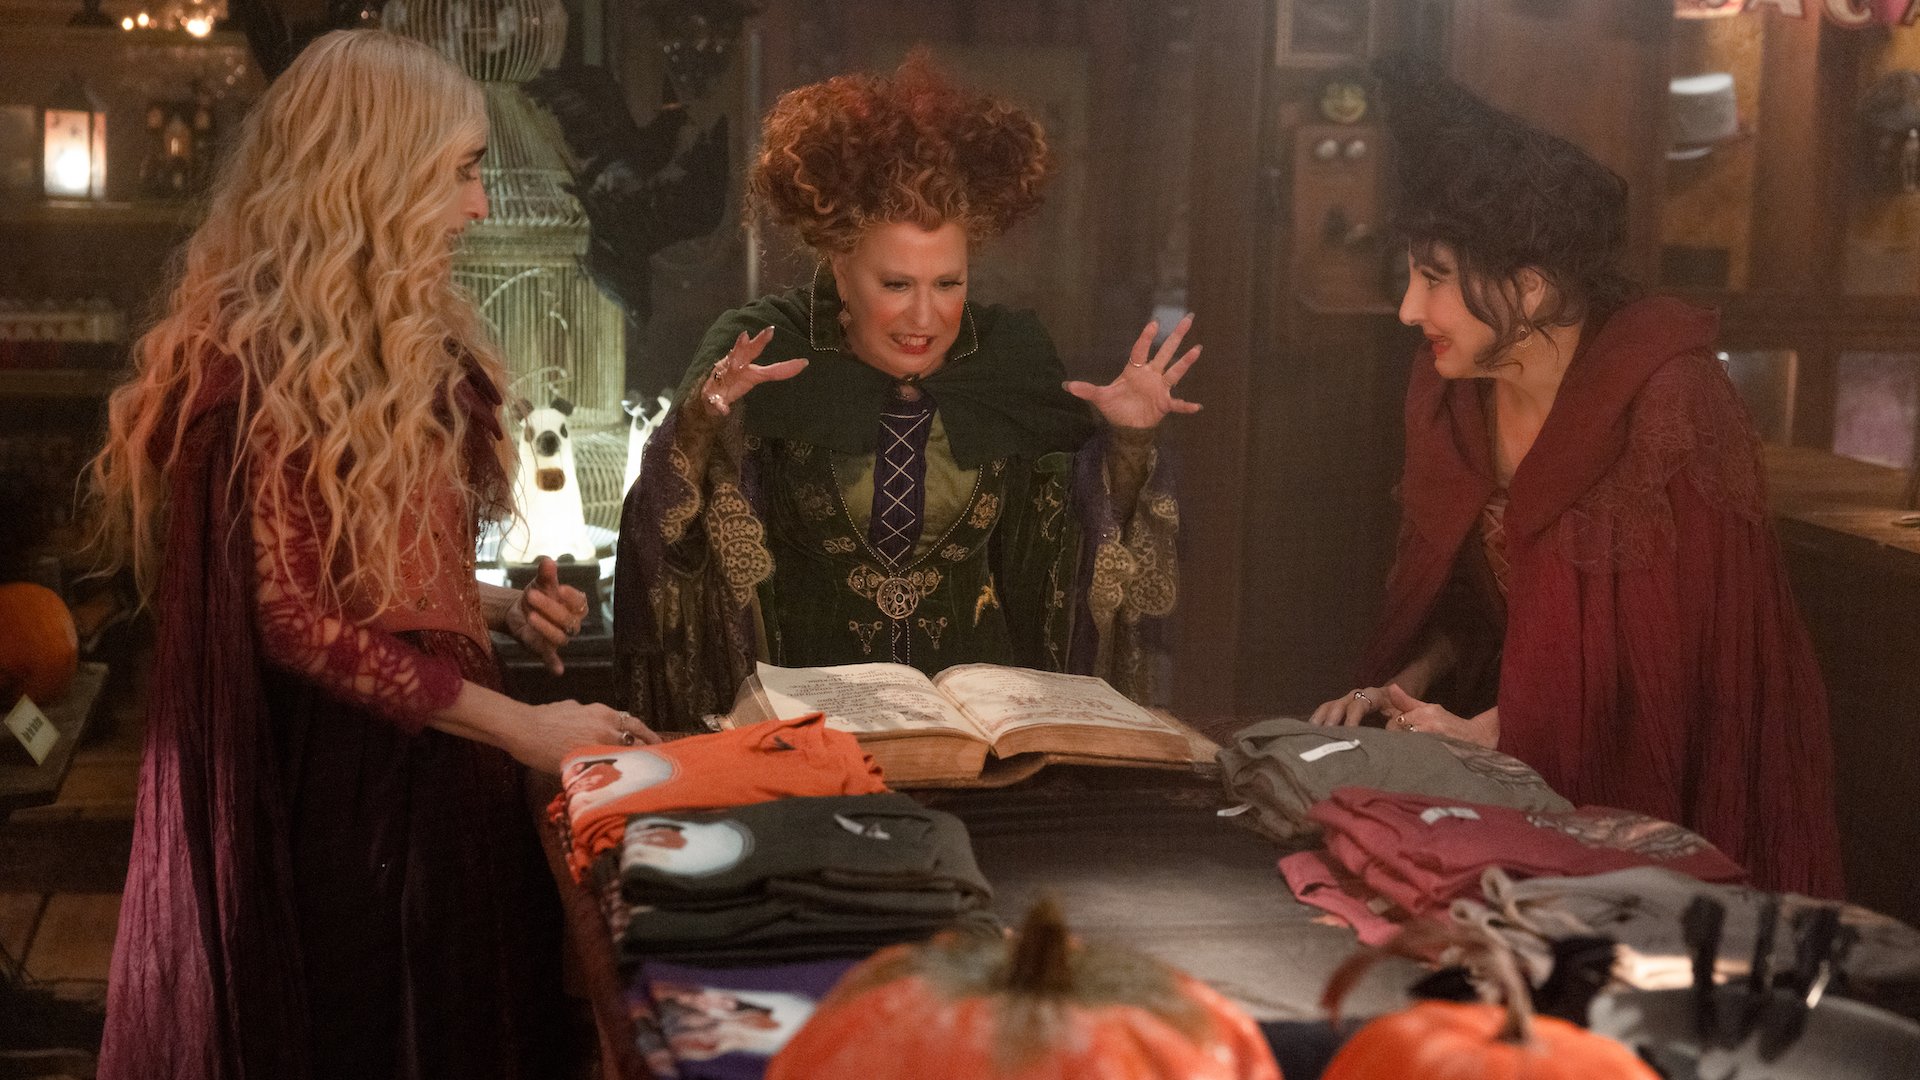 Three witches stand around a spell book and table laden with spell things.